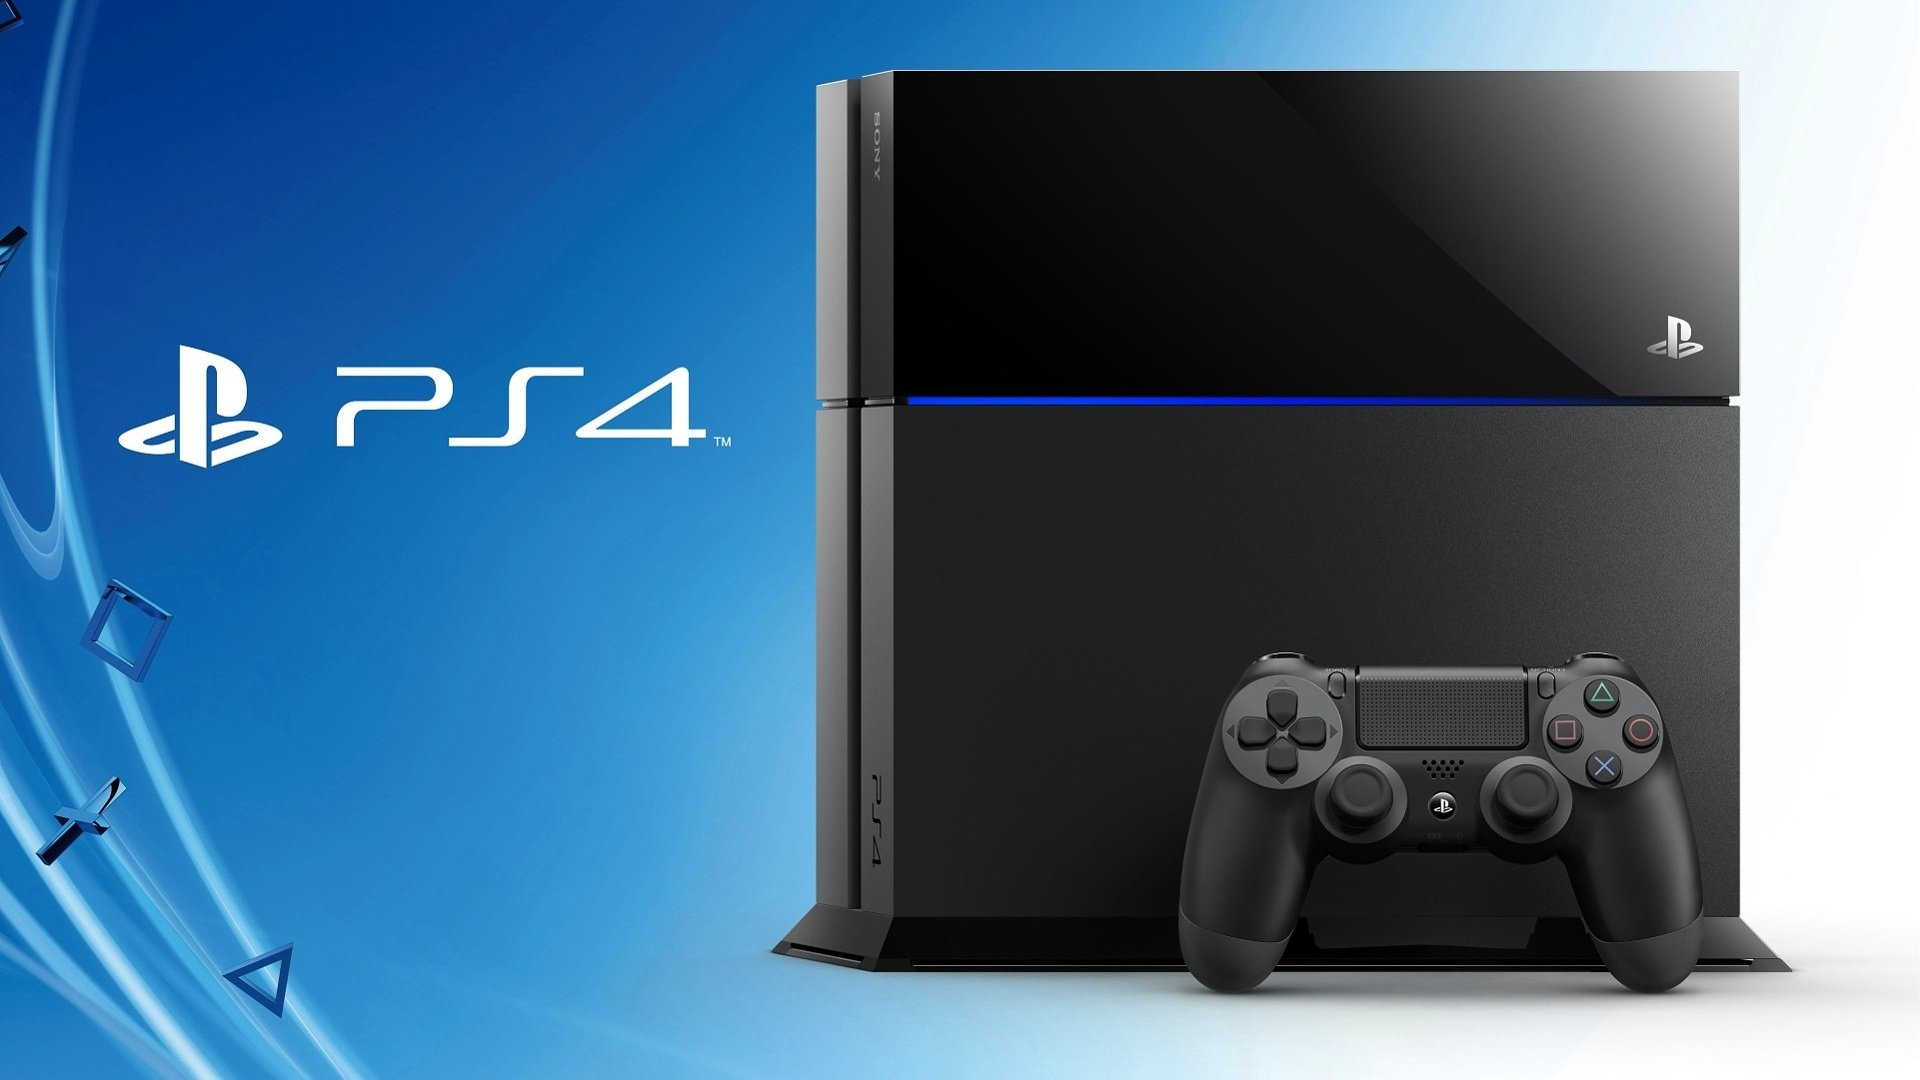 Malicious message massively incapacitate the PlayStation 4